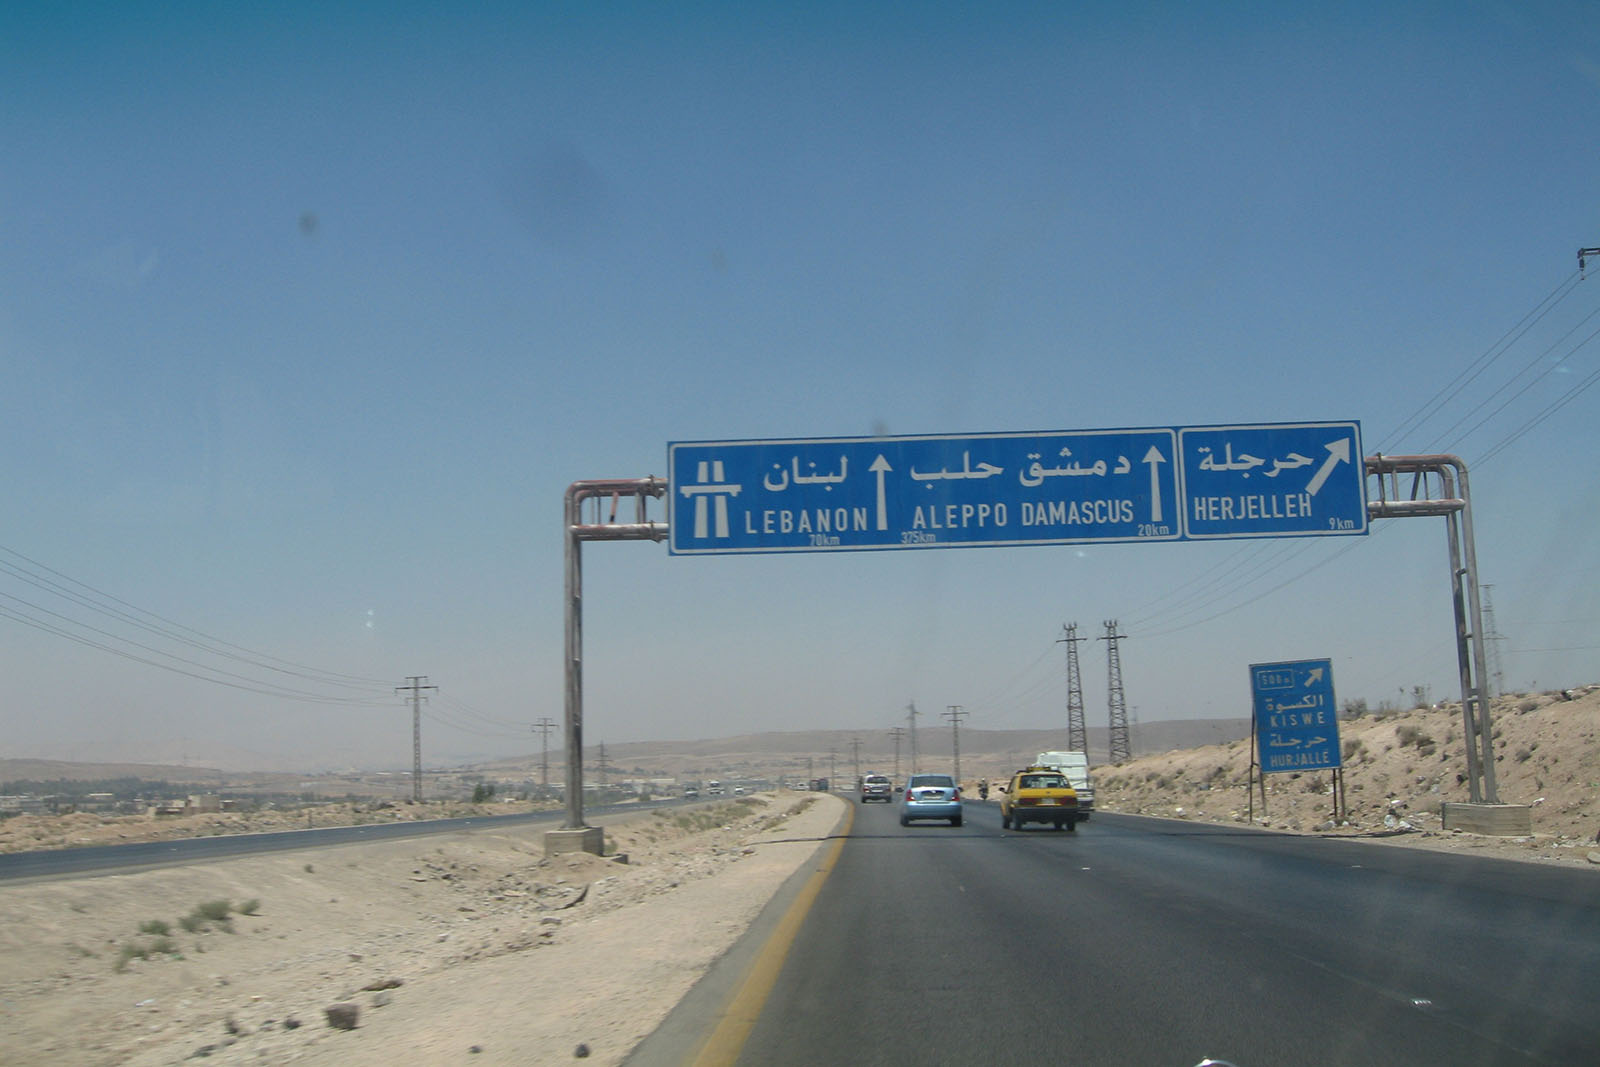 Directional highway sign to Lebanon, Aleppo, Damascus and Herjelleh